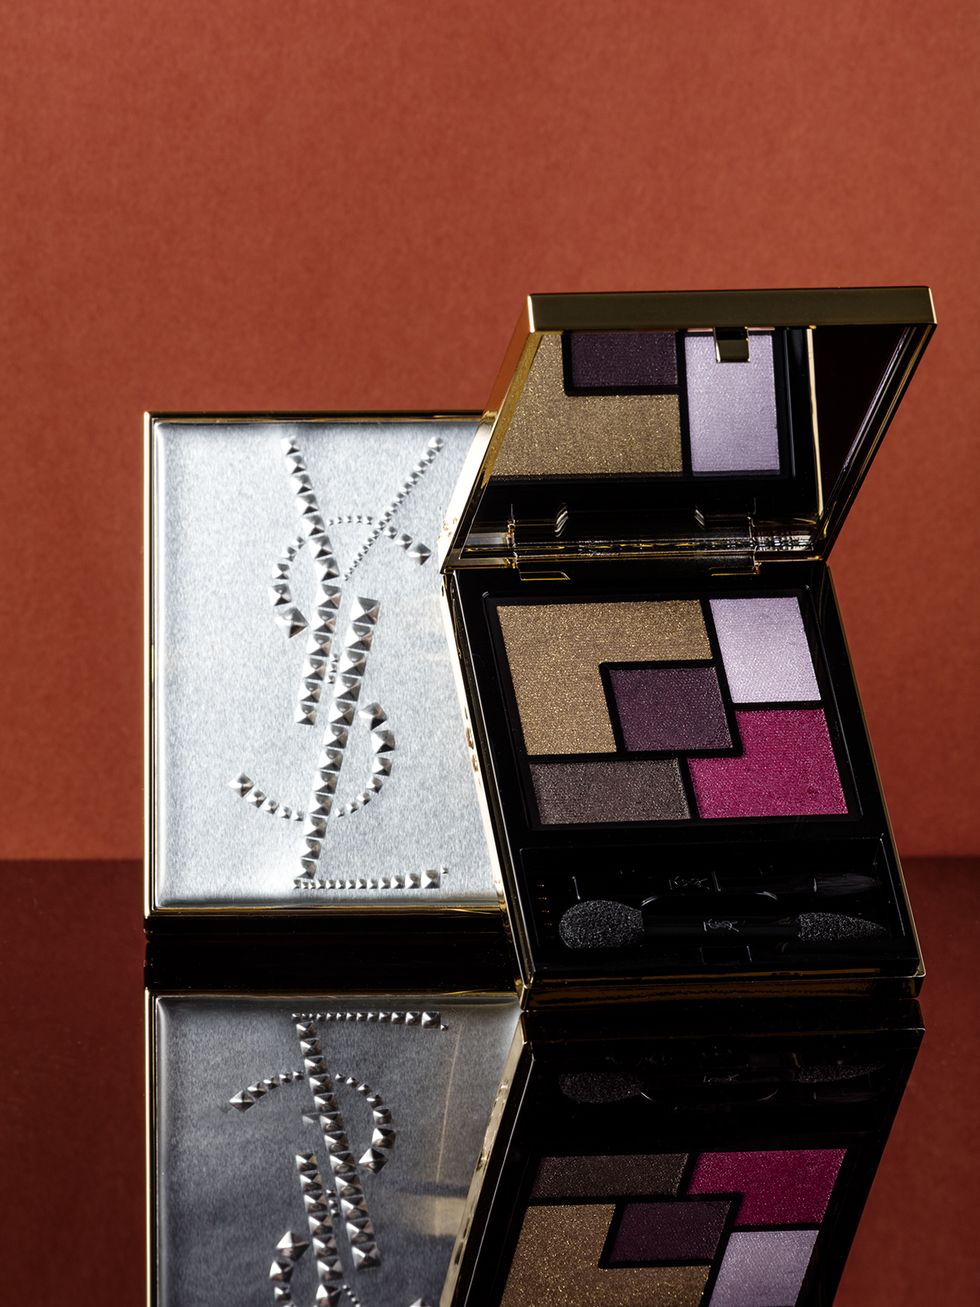 Brown, Eye shadow, Magenta, Cosmetics, Rectangle, Violet, Tints and shades, Lavender, Box, Material property, 